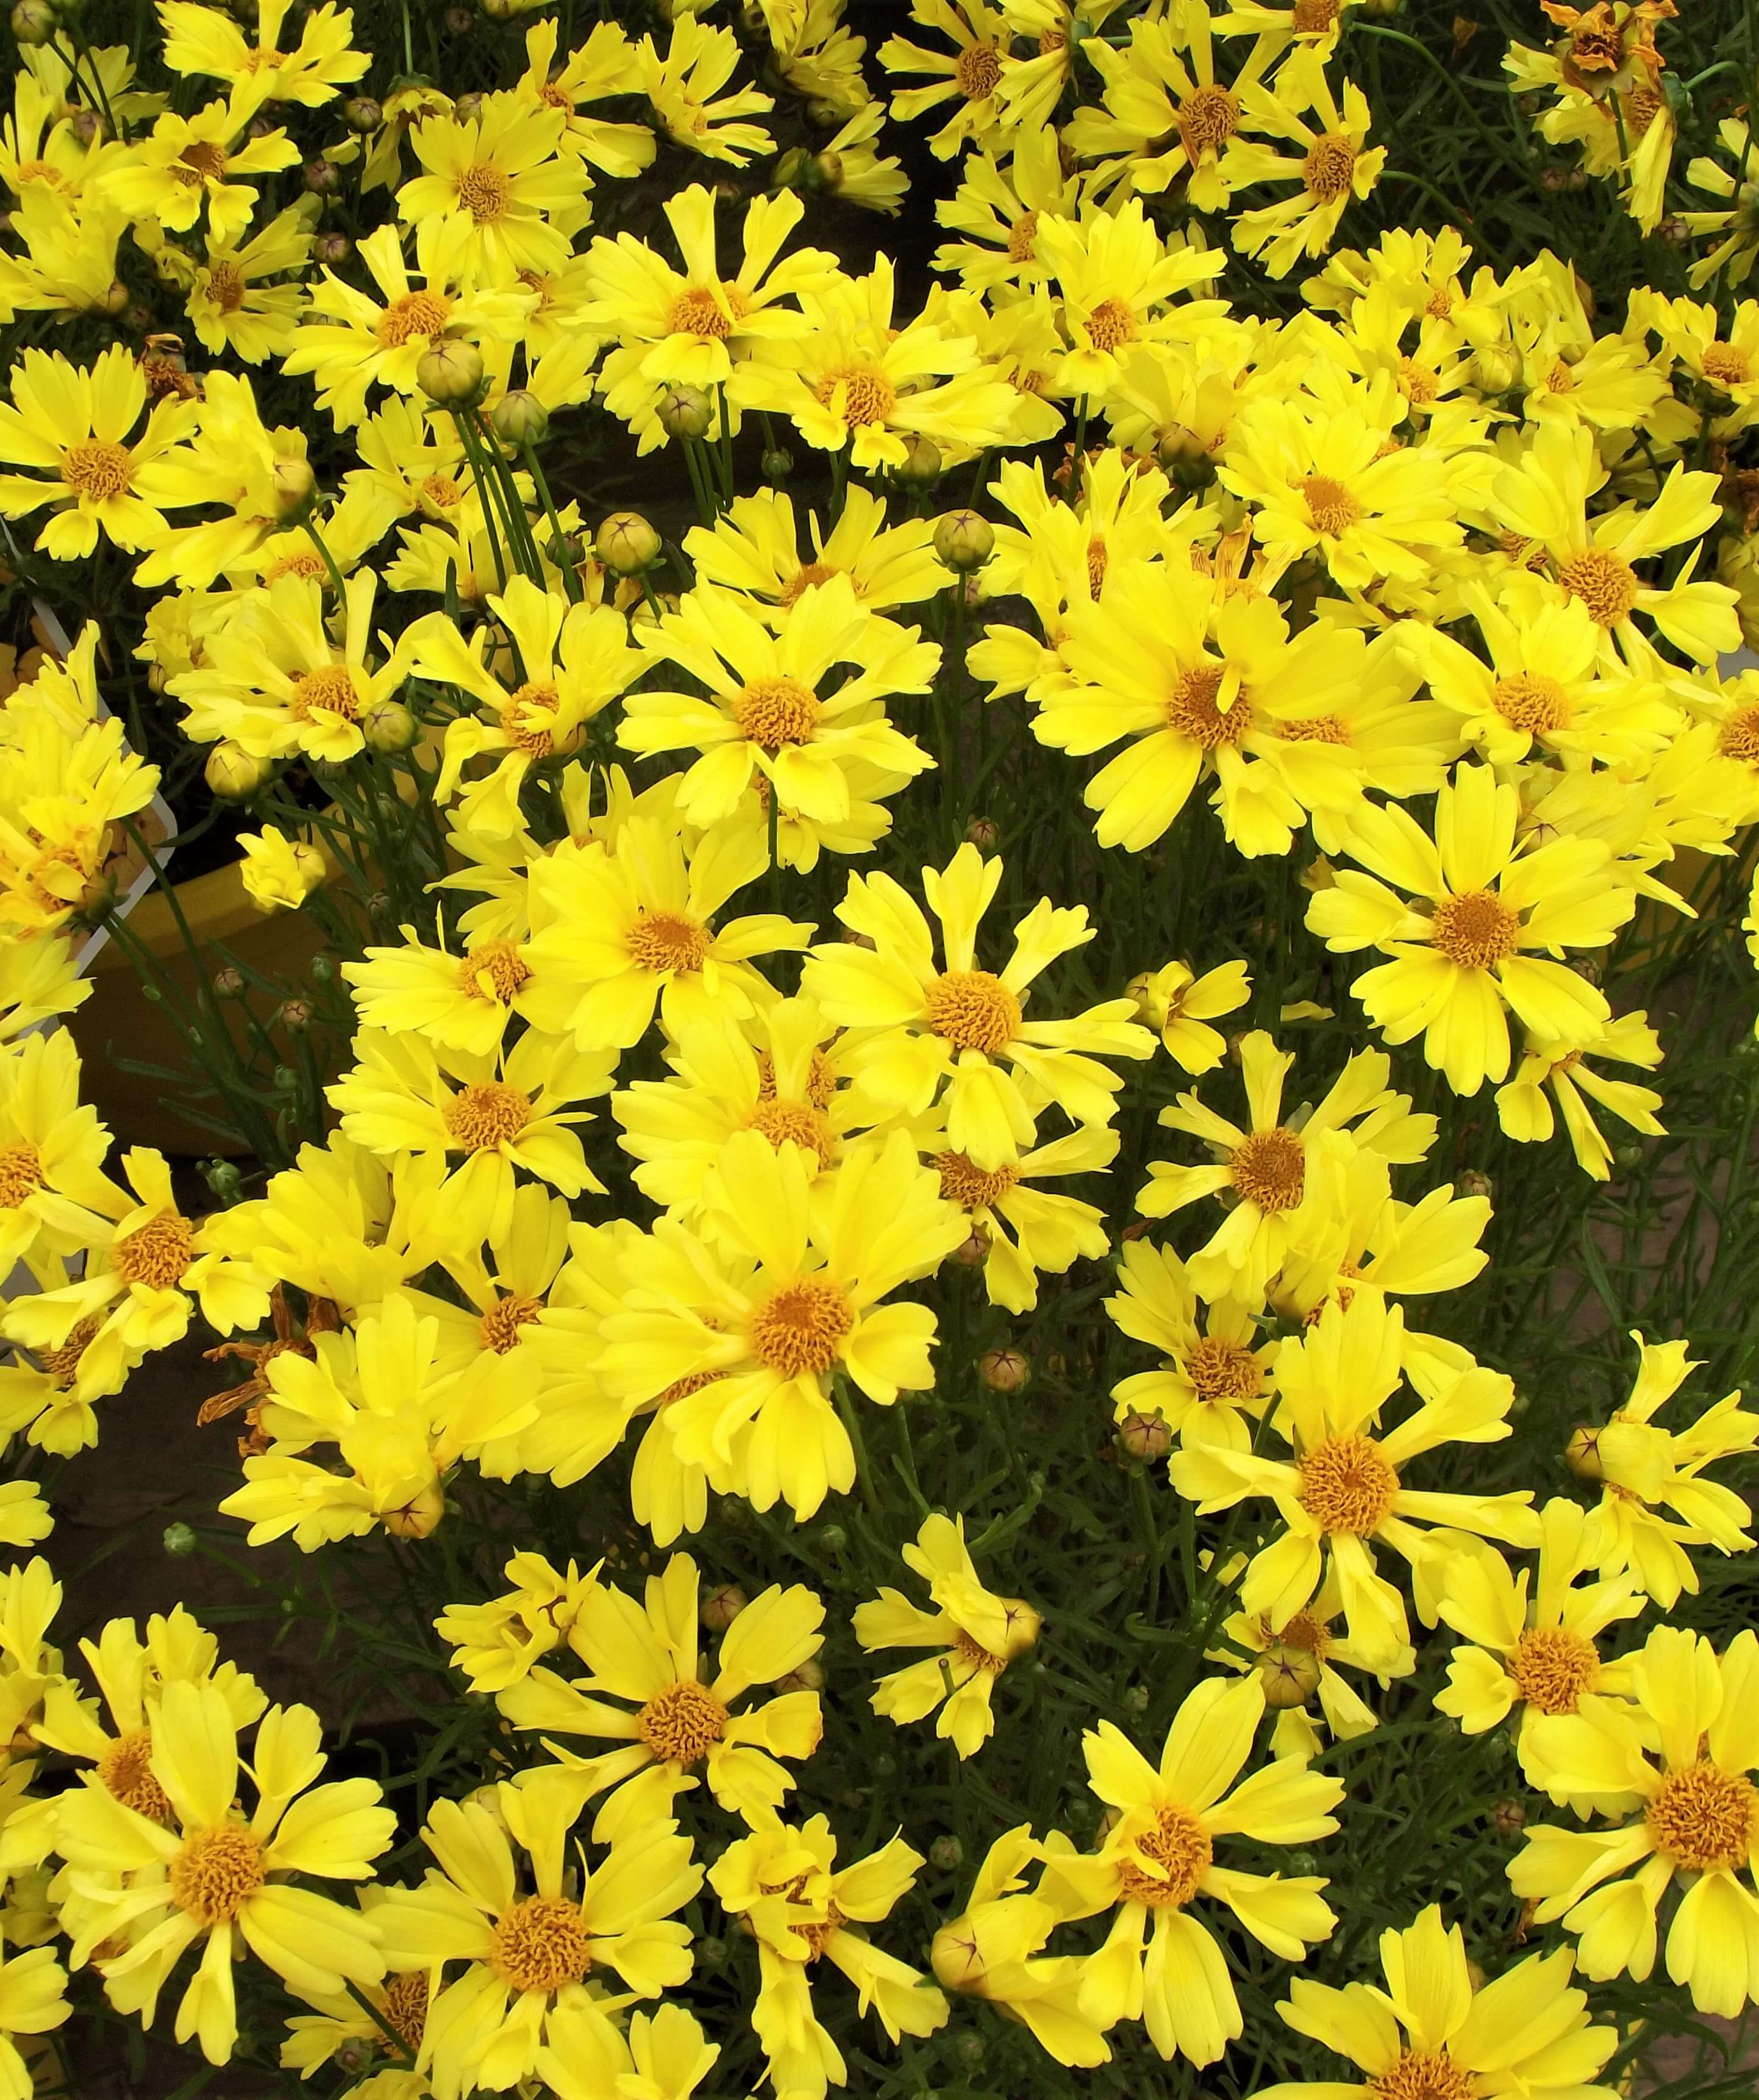 Mouse-Ear Coreopsis (Coreopsis auriculata)